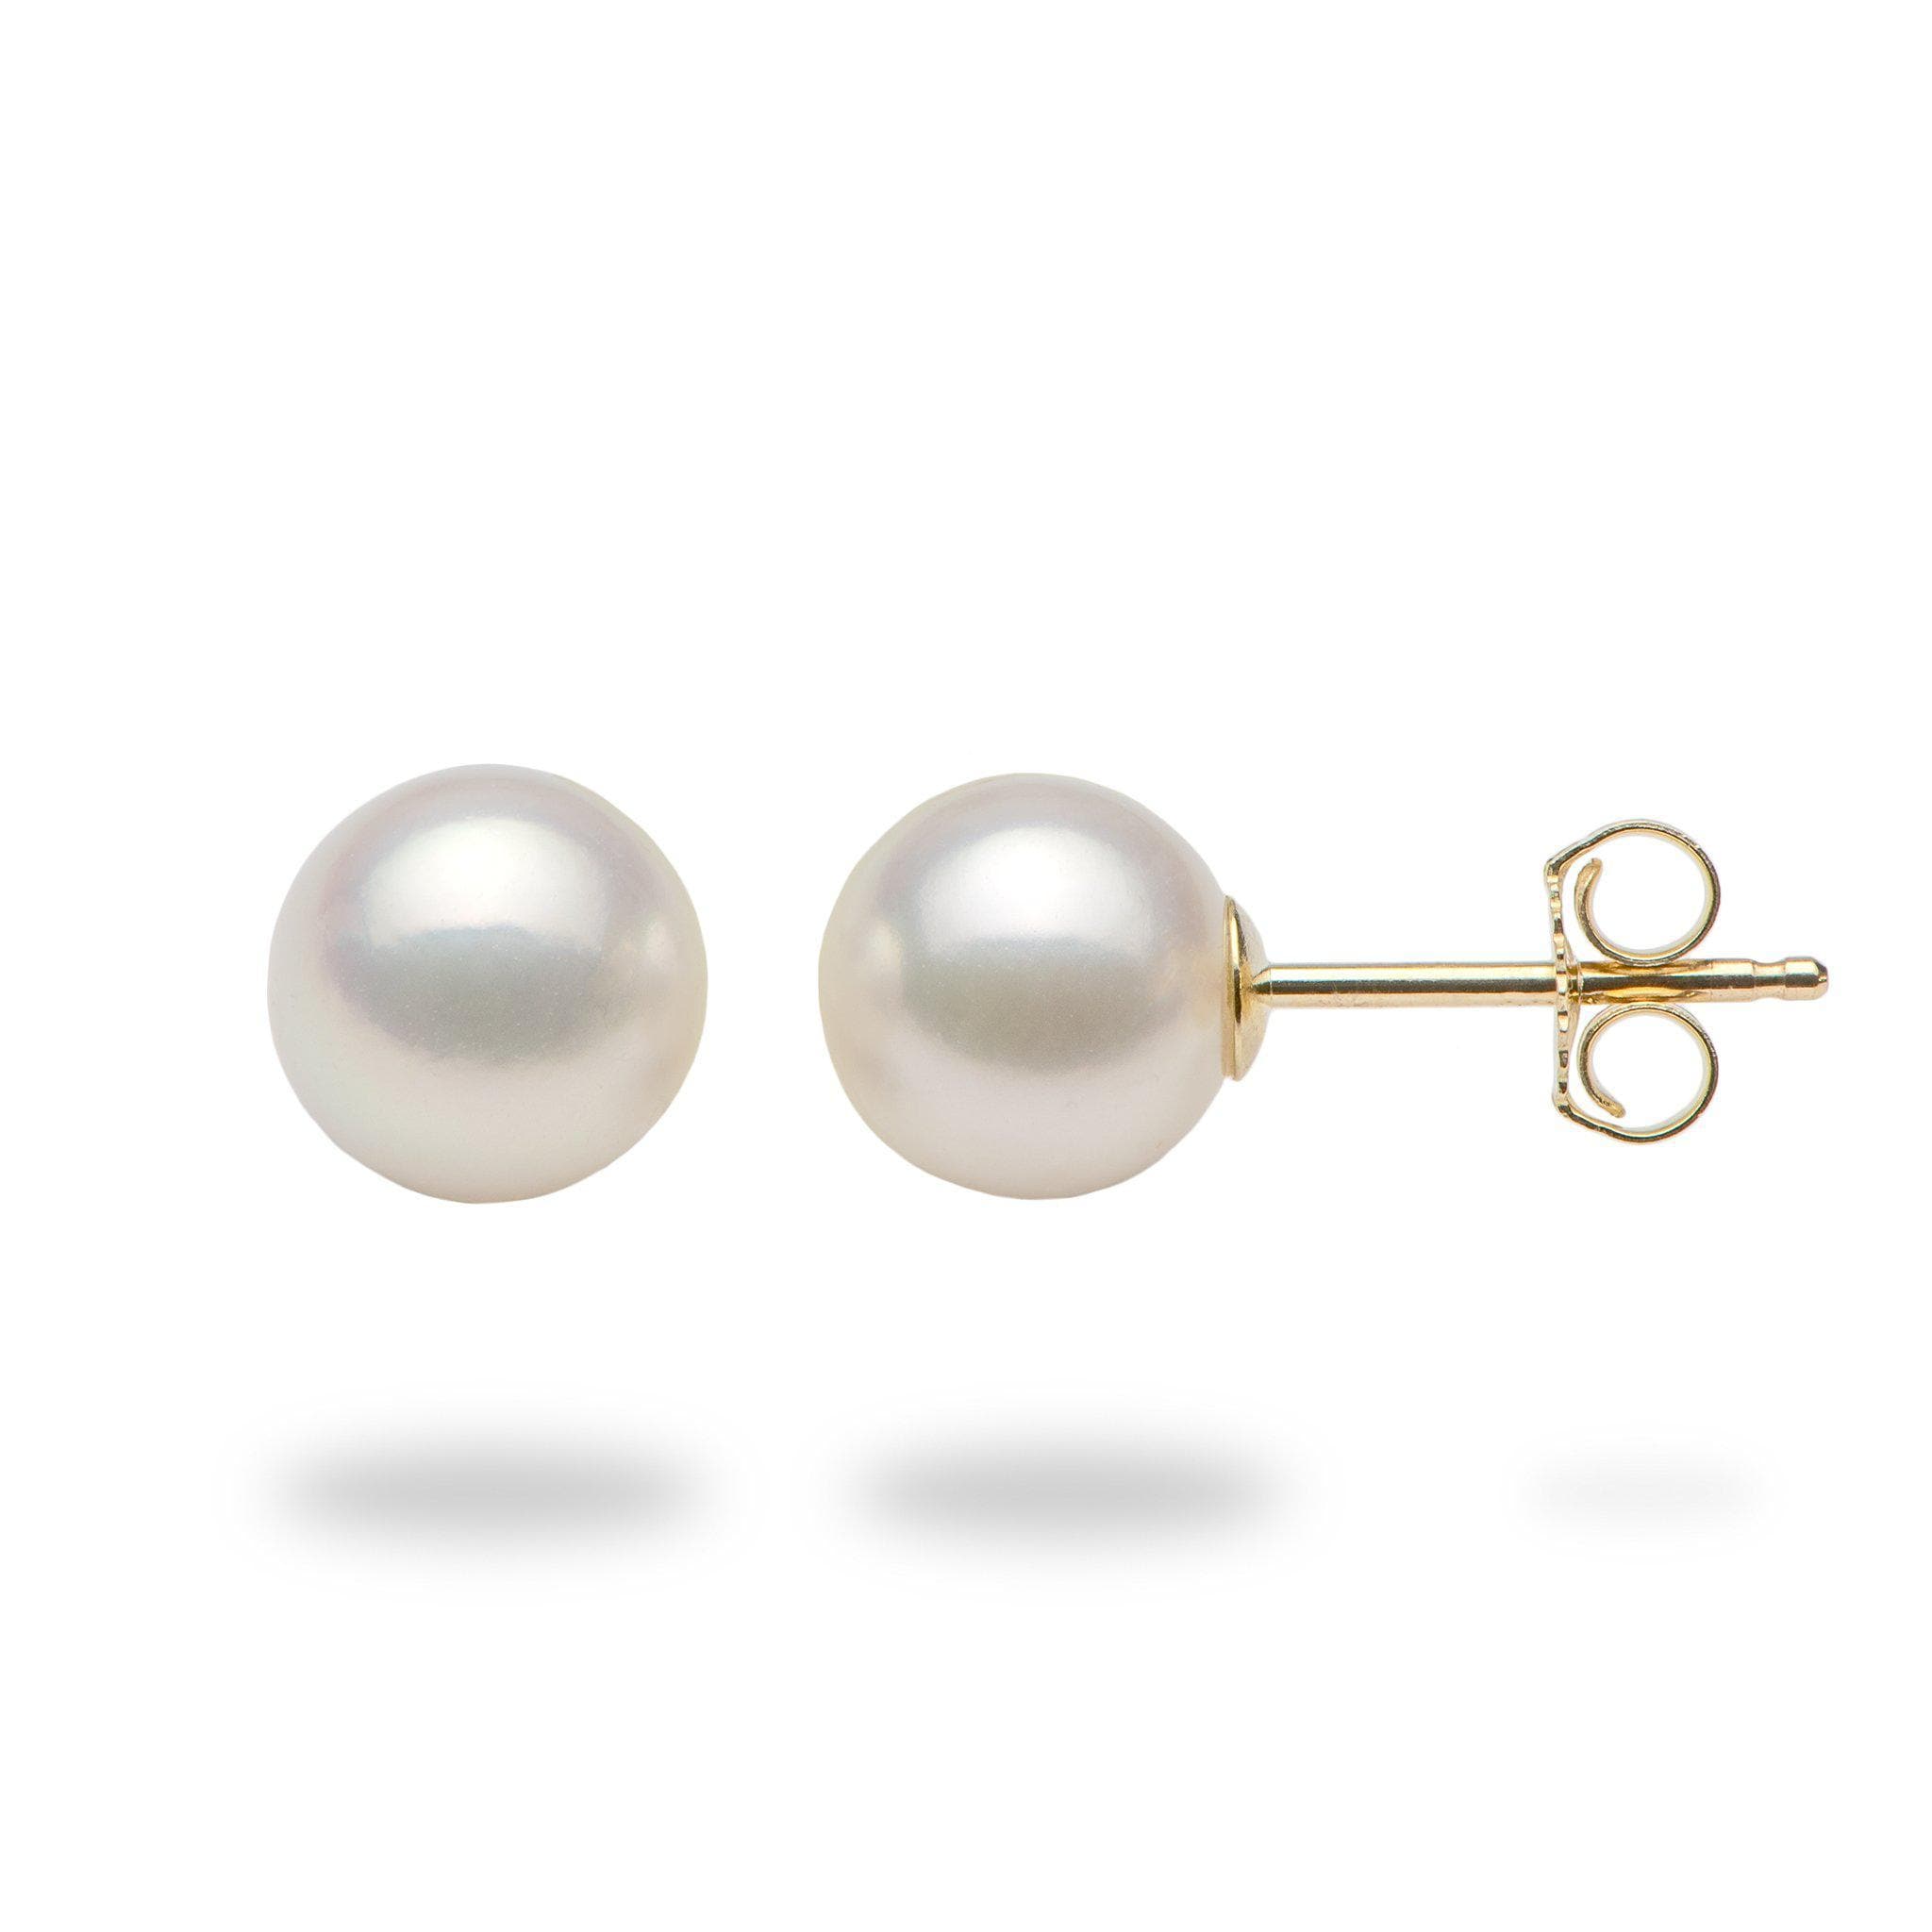 Ikecho 18ct Yellow Gold Stud Earrings With 758mm Japanese Akoya Pearl